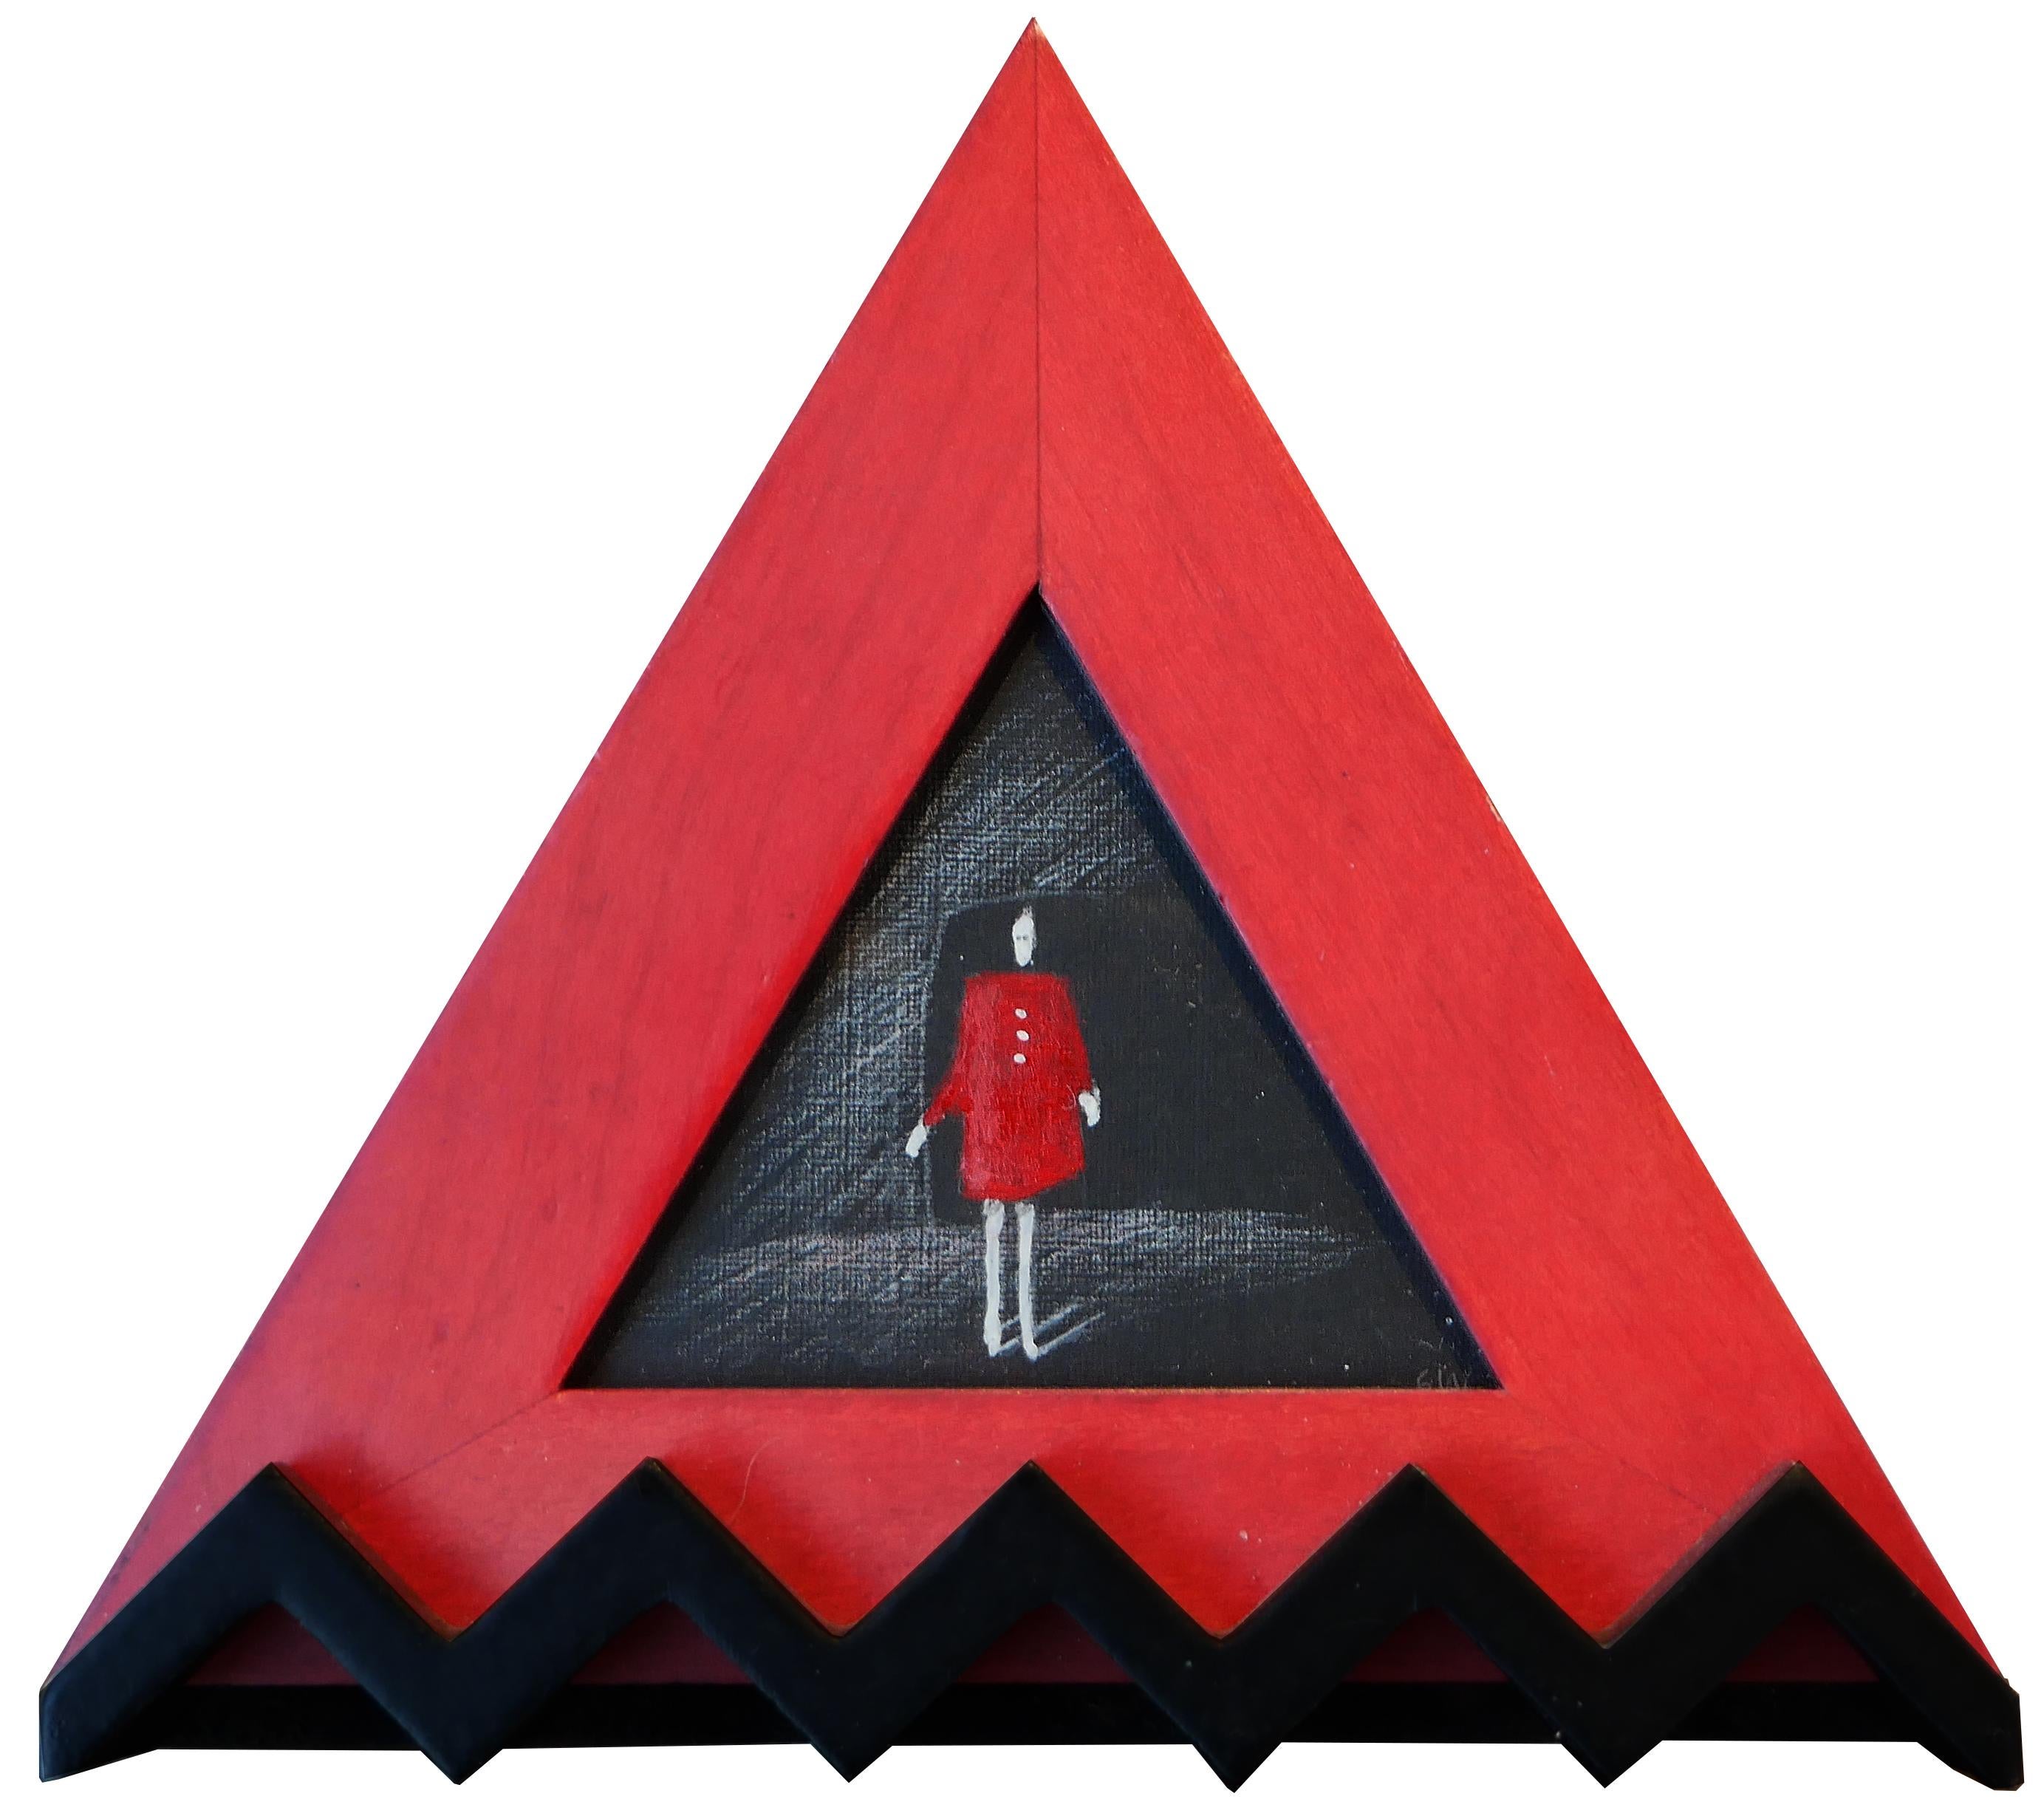 Scott Woodard Figurative Painting - "Red Dress" Red, Black, and White Abstract Surrealist Triangular Painting 